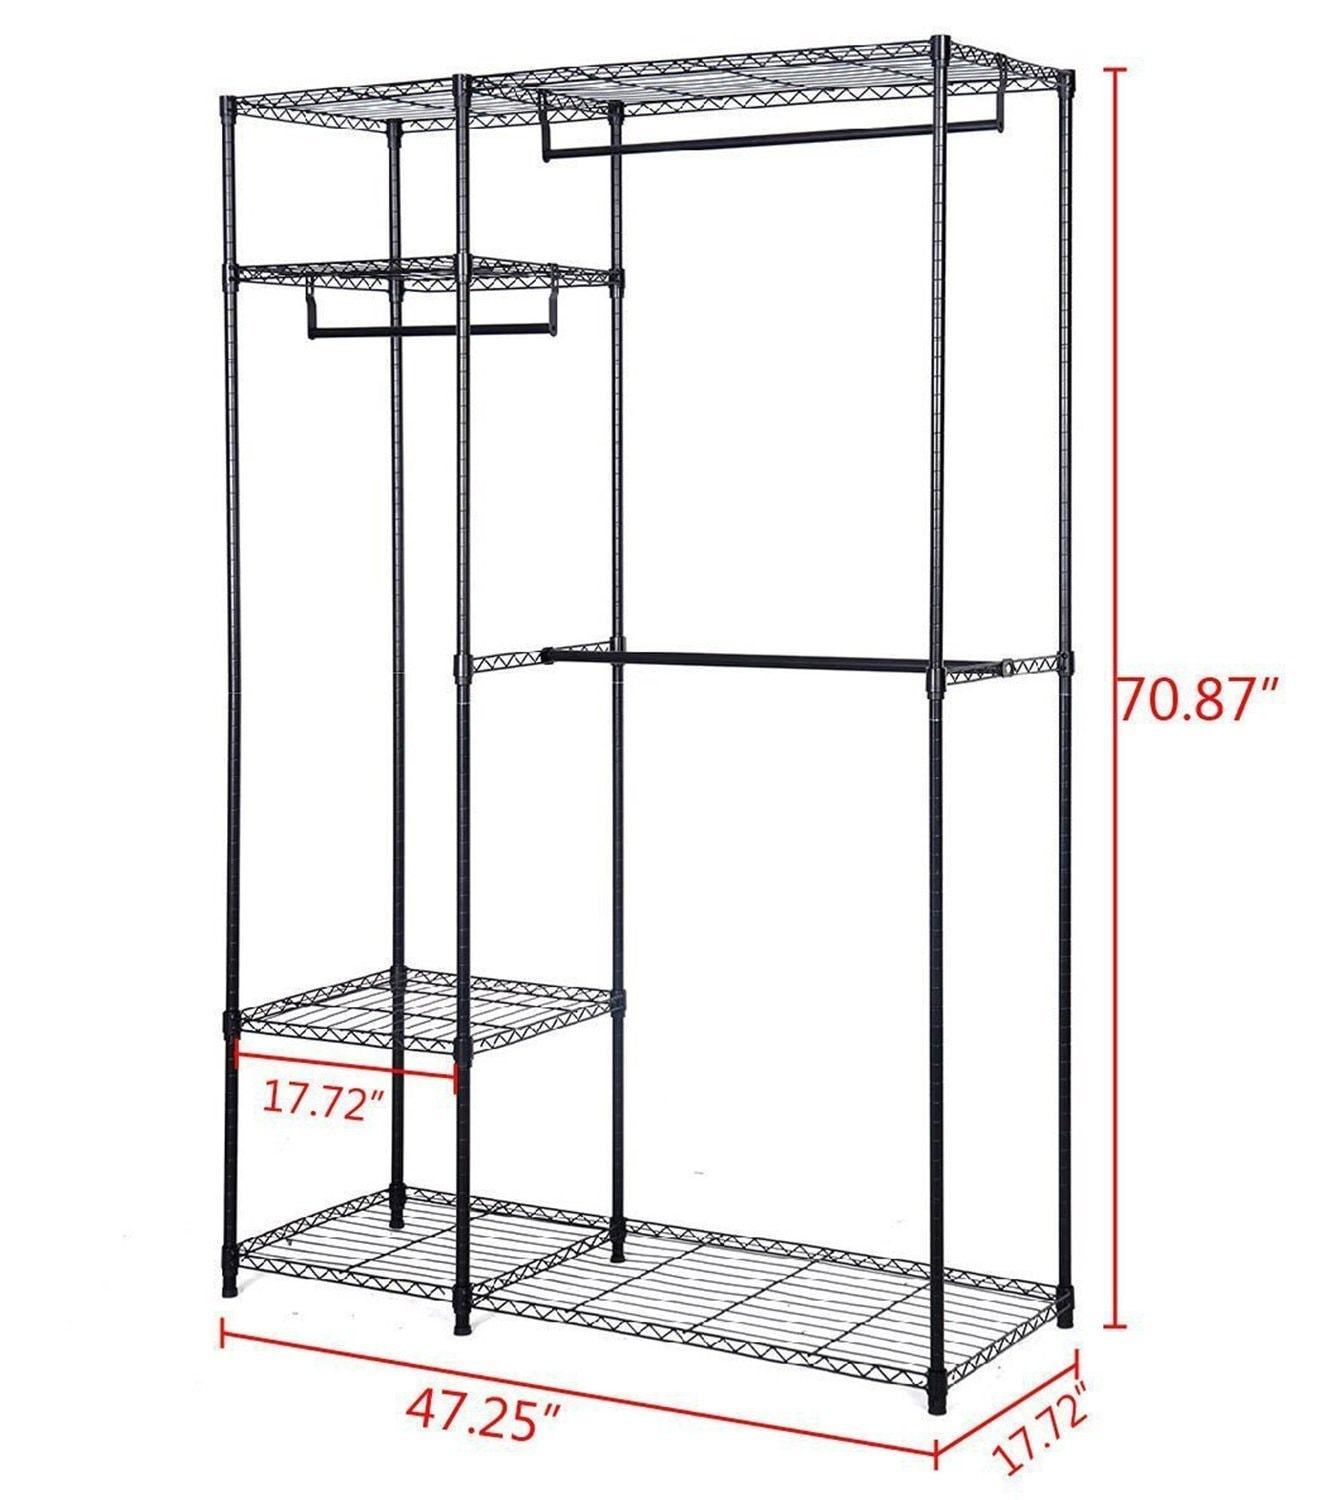 Best seller  s afstar safstar heavy duty clothing garment rack wire shelving closet clothes stand rack double rod wardrobe metal storage rack freestanding cloth armoire organizer 1 pack